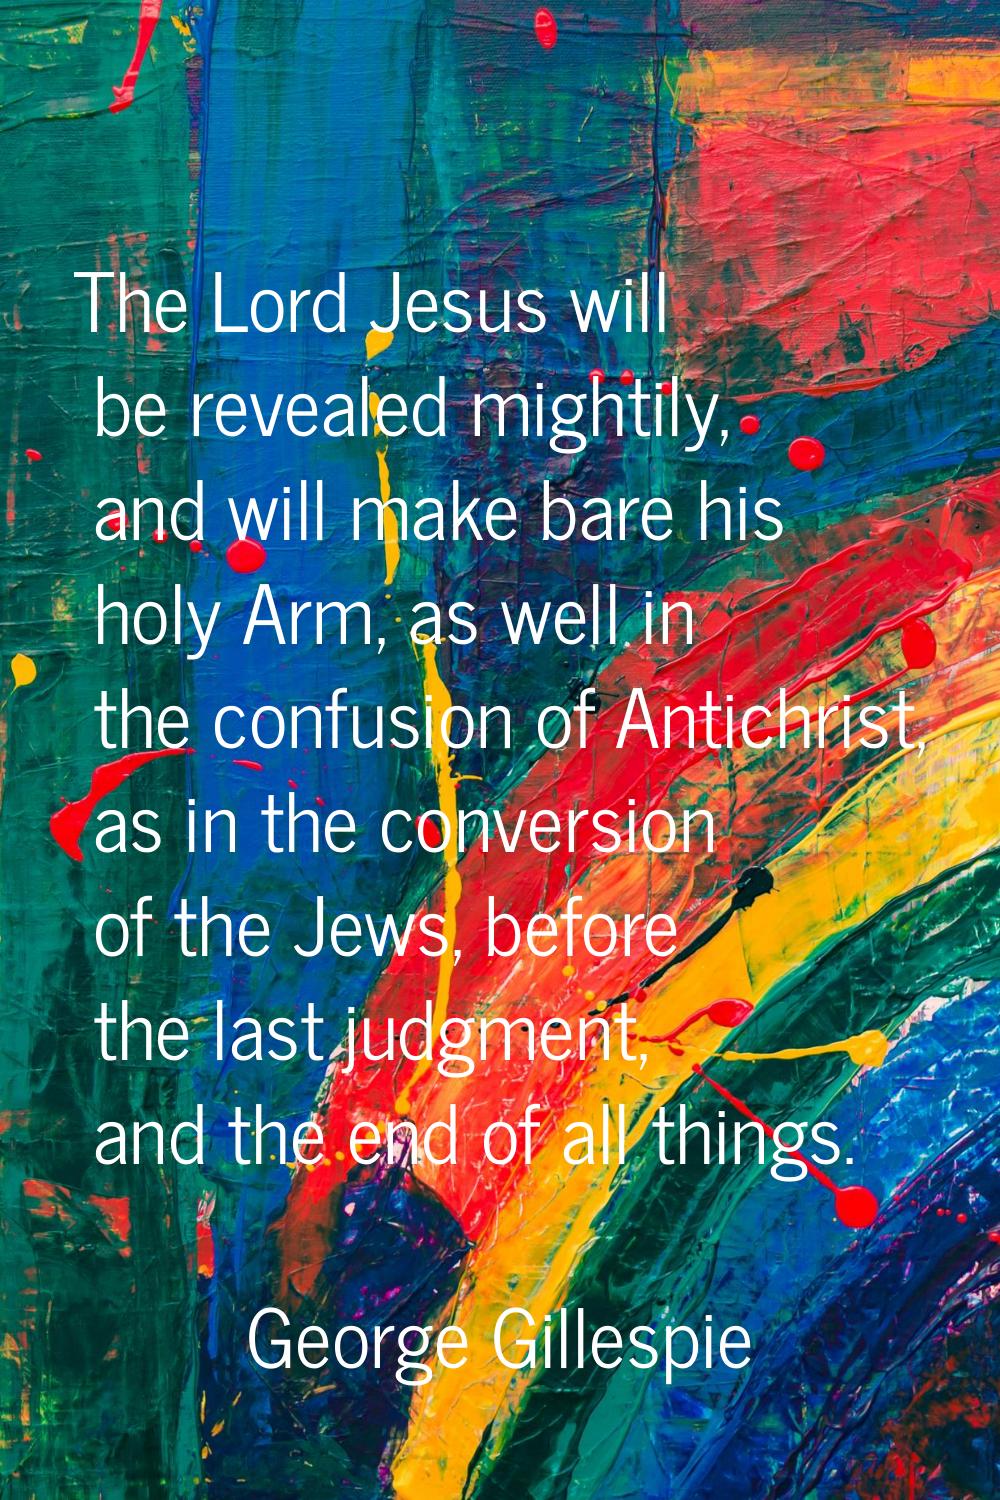 The Lord Jesus will be revealed mightily, and will make bare his holy Arm, as well in the confusion